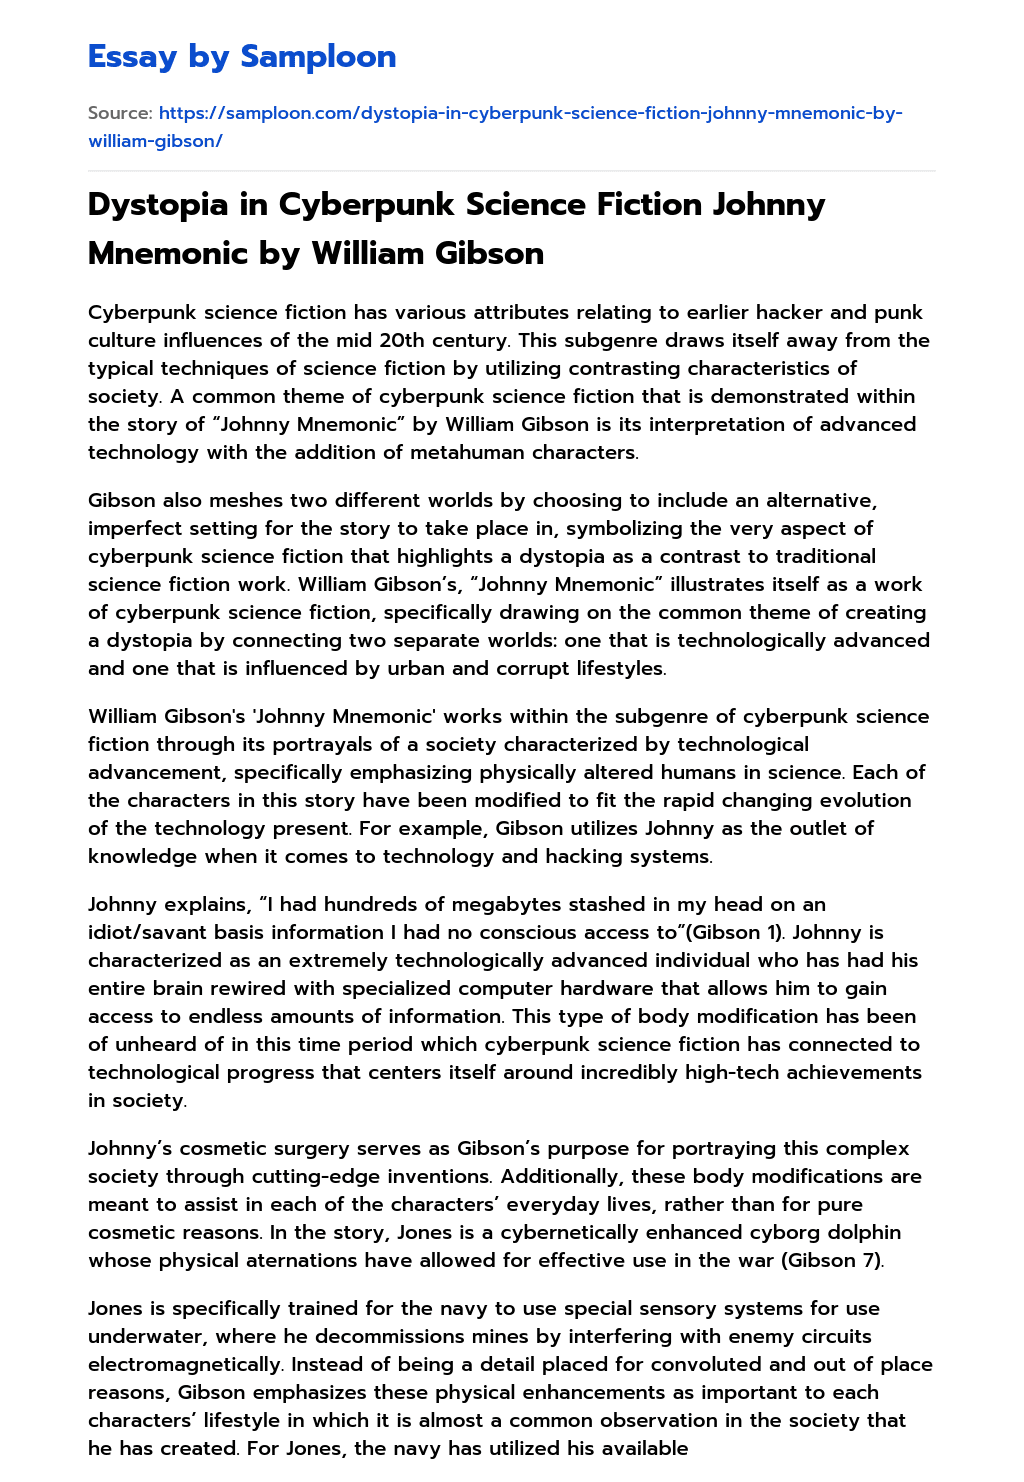 Dystopia in Cyberpunk Science Fiction Johnny Mnemonic by William Gibson Summary essay